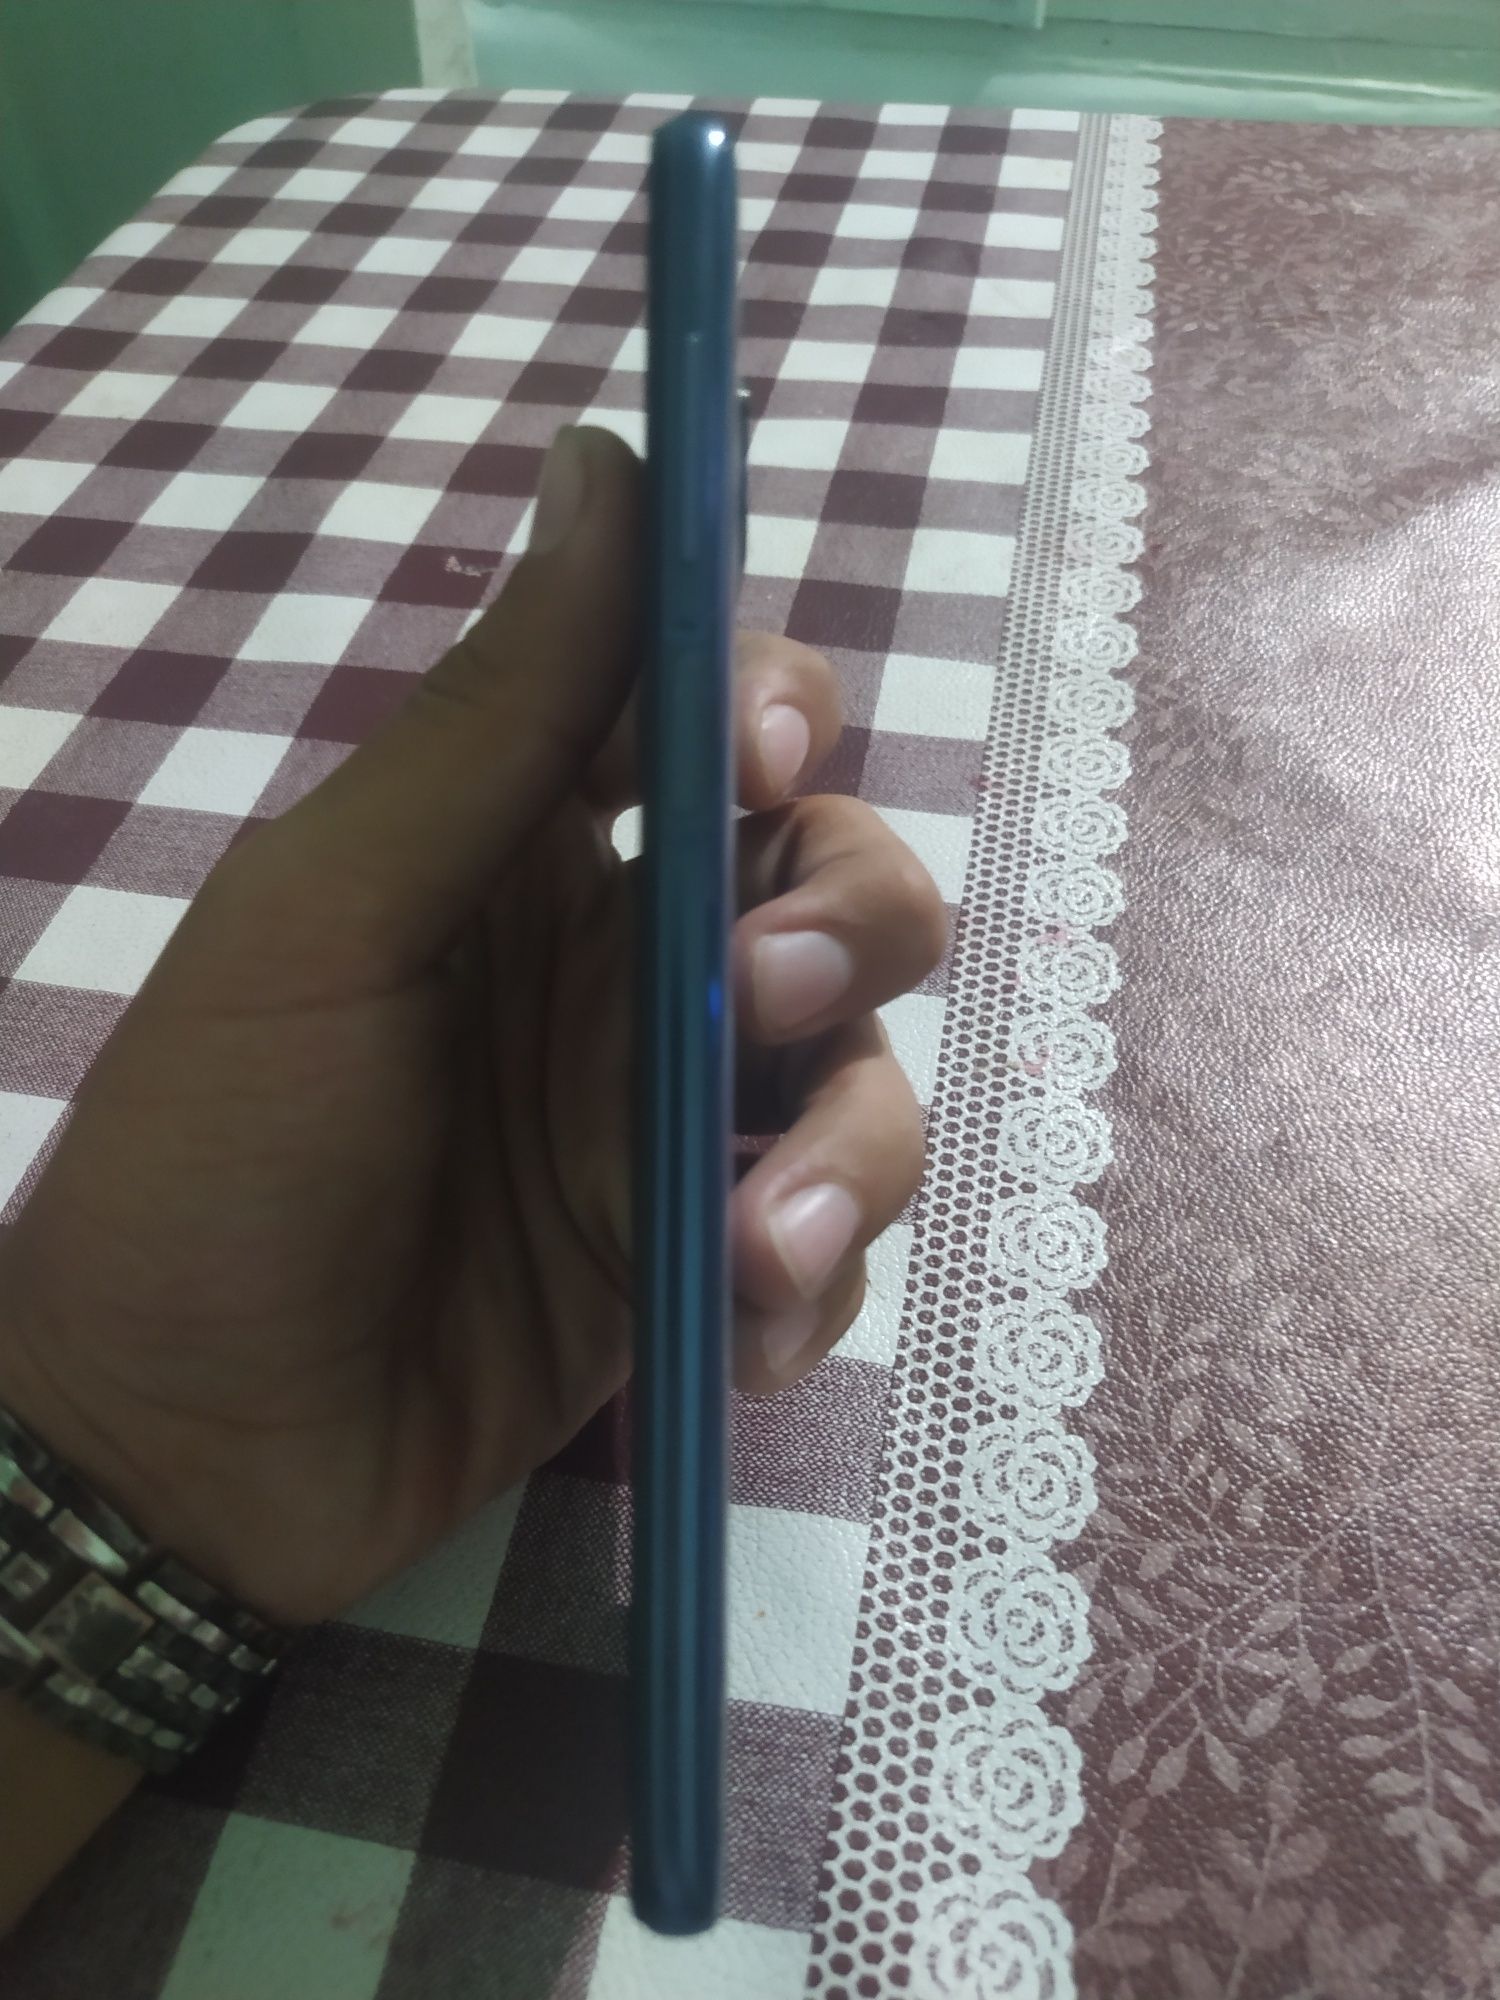 RED MI NOTE 9S holat ideal